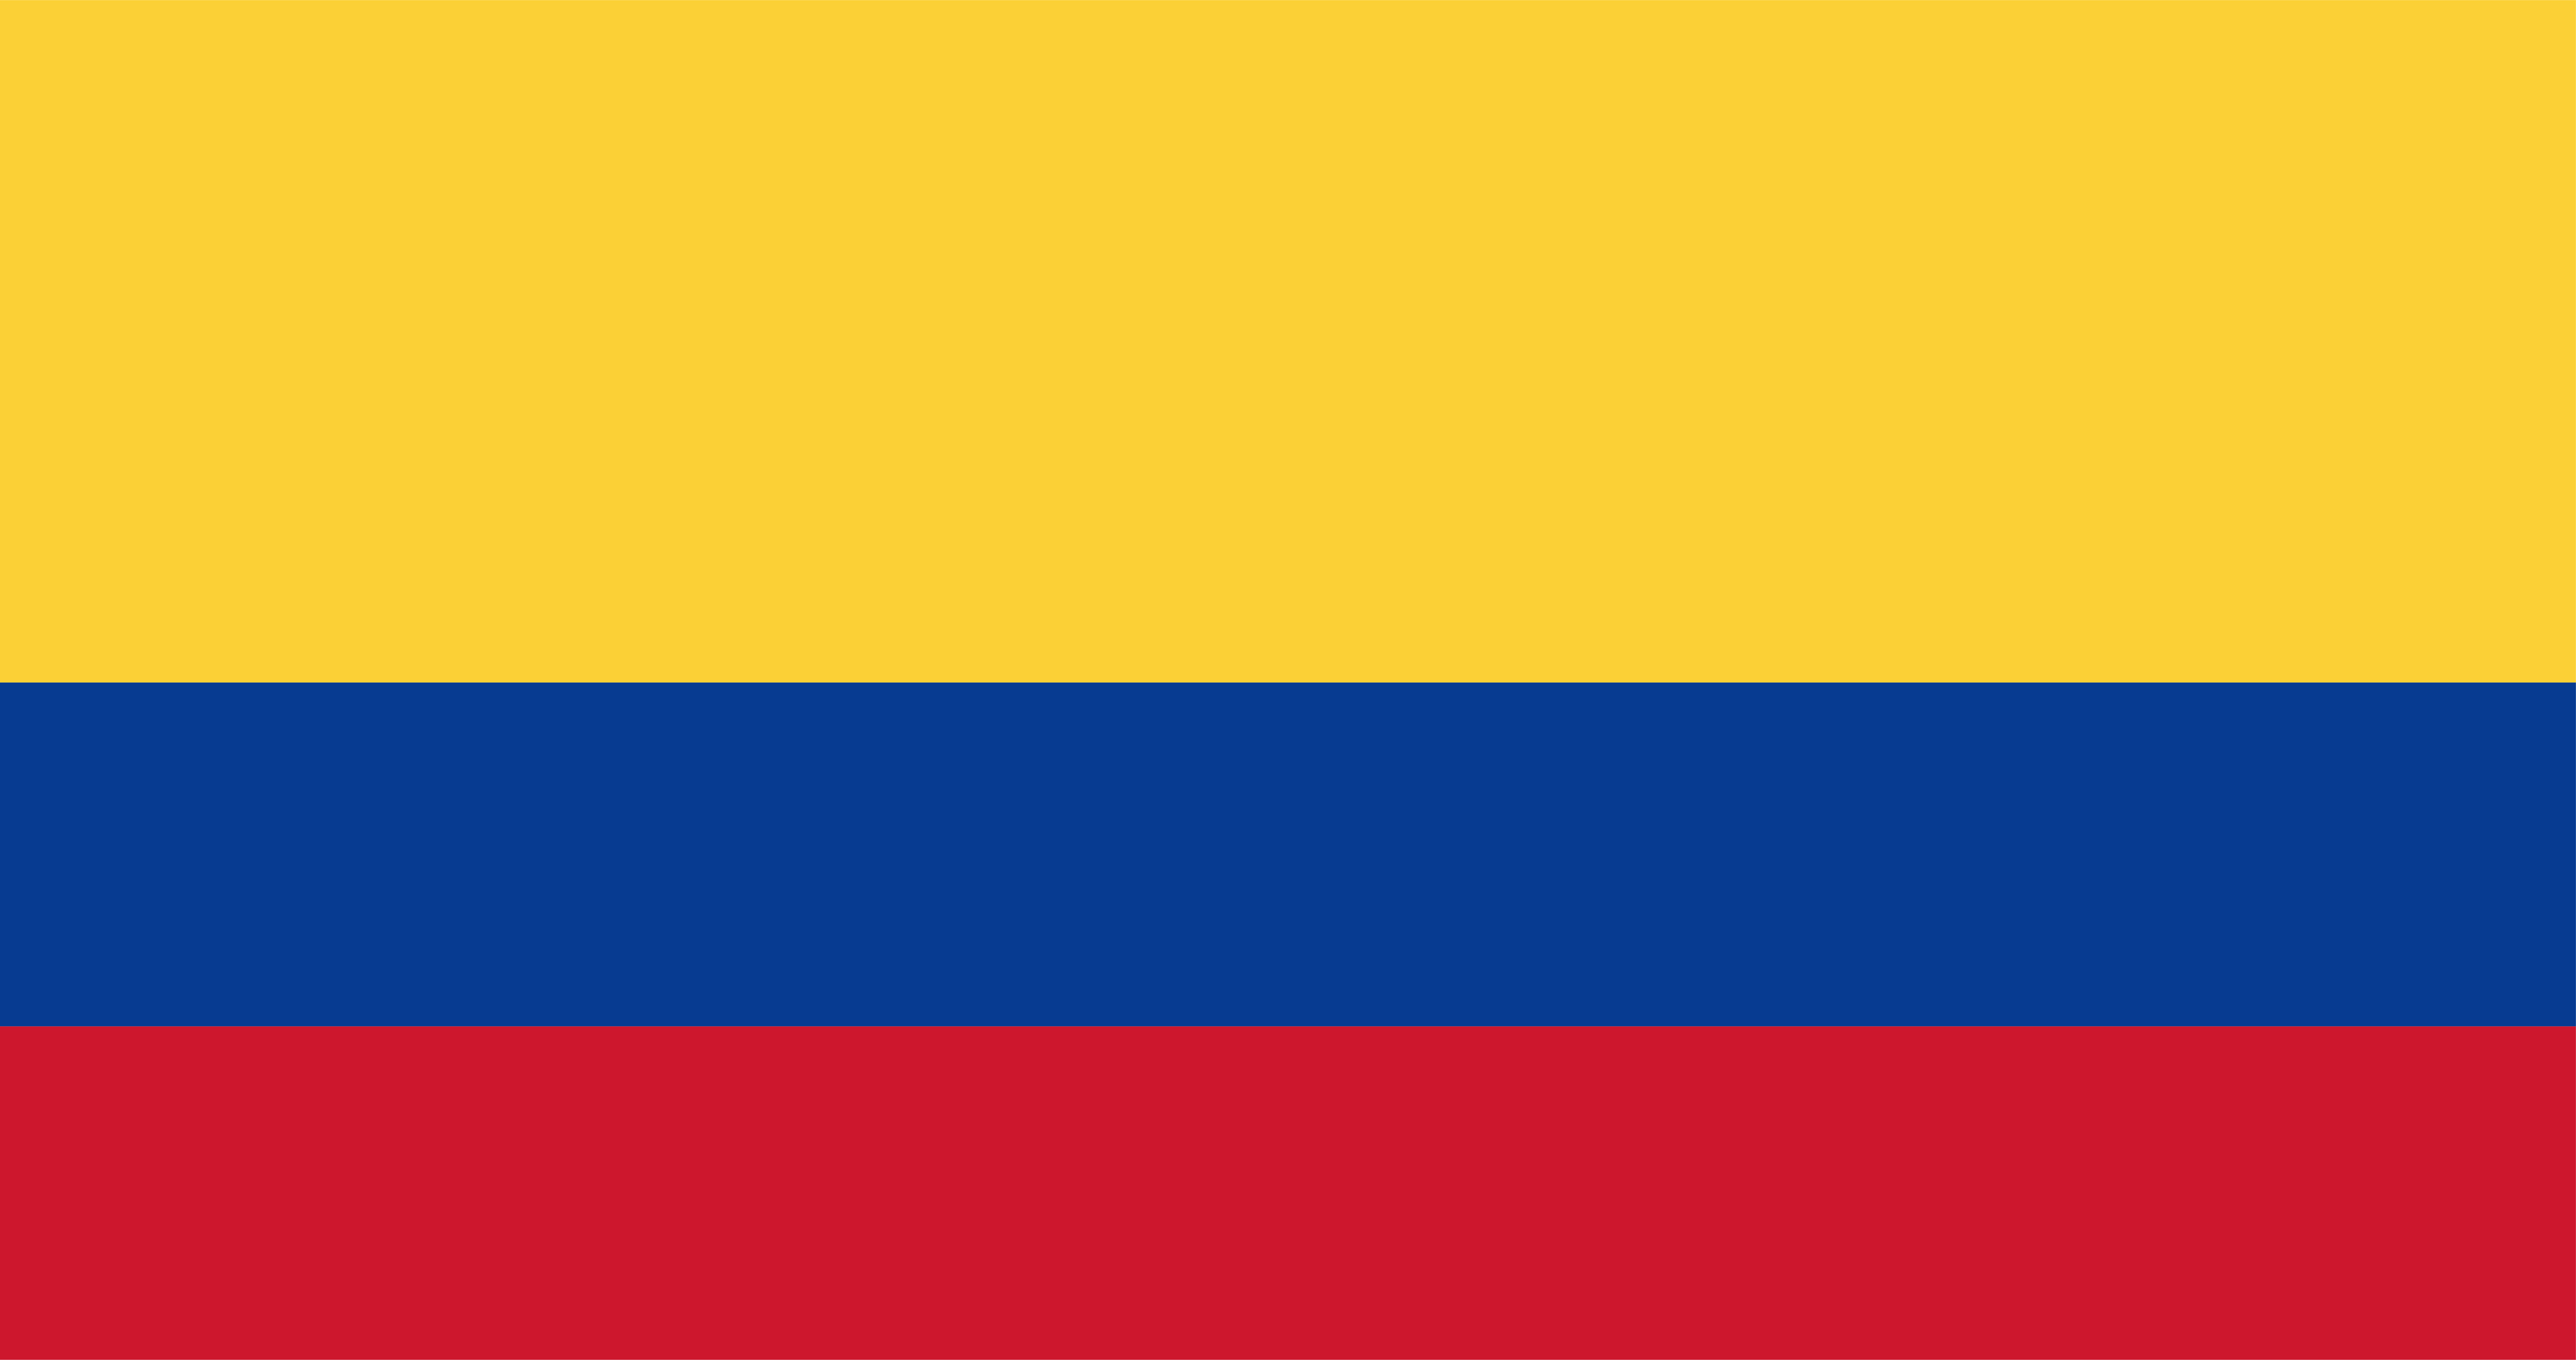 Colombia Free Vector Art - (328 Free Downloads)